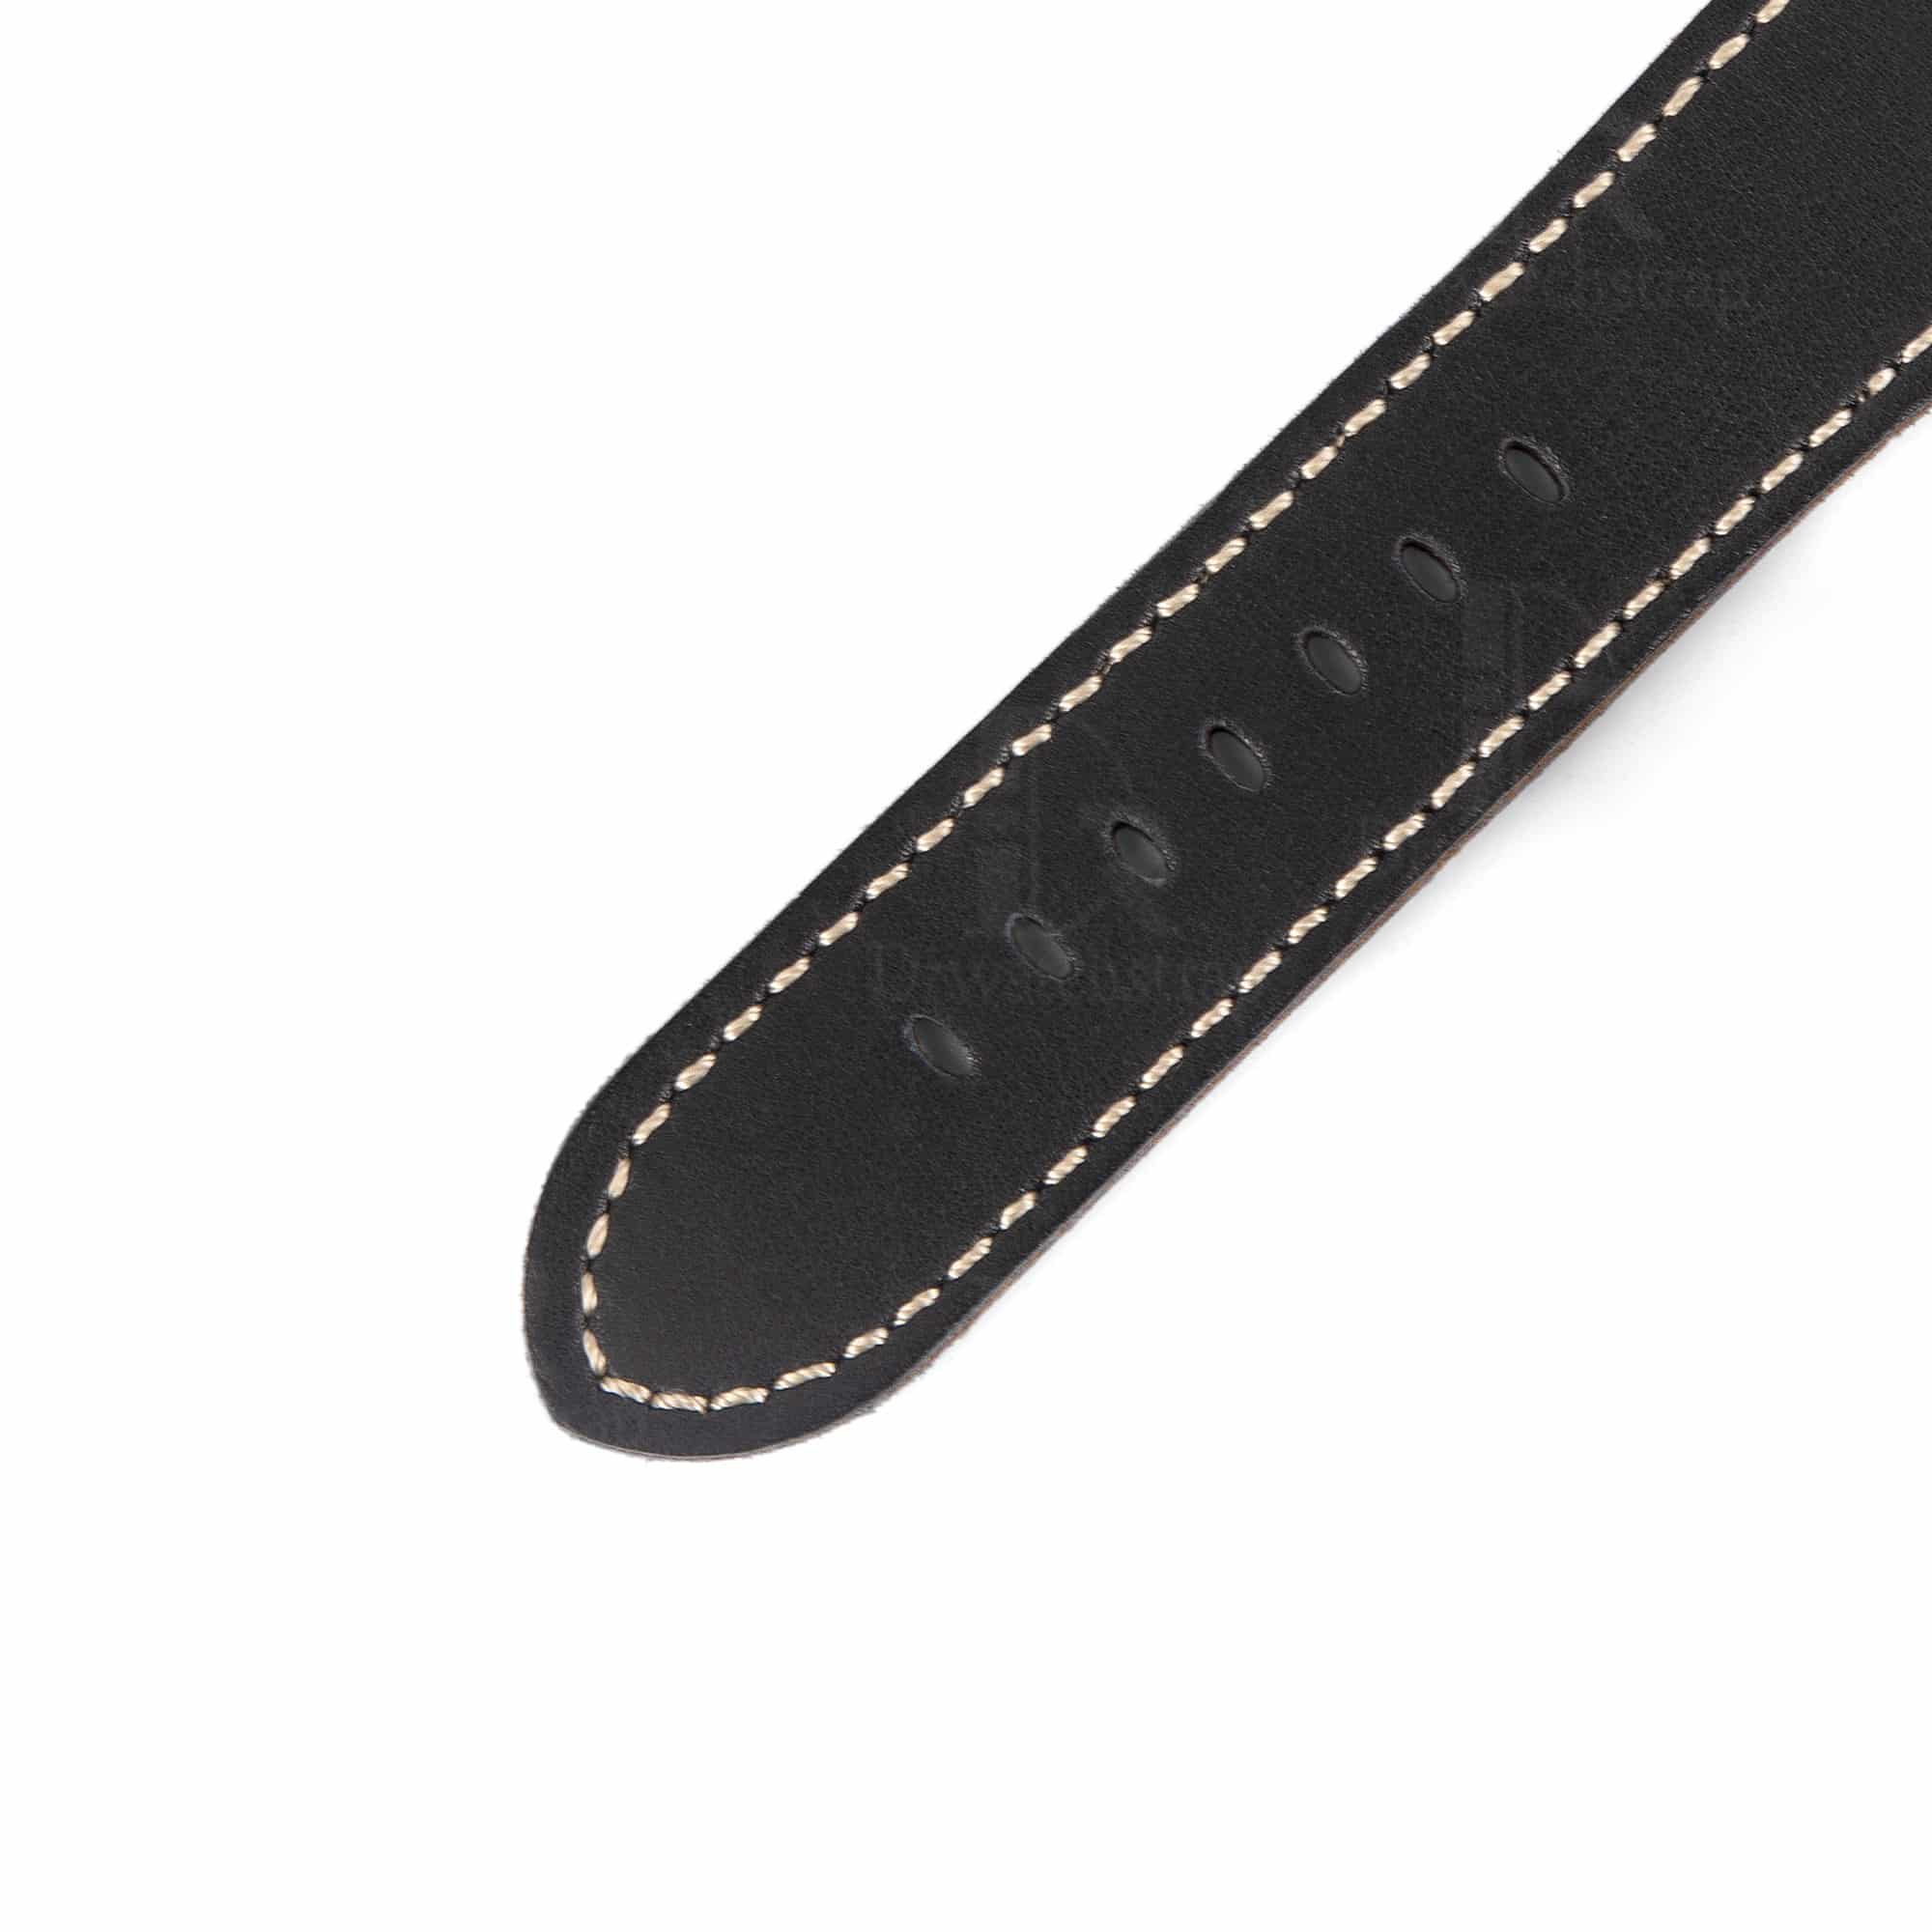 Panerai strap 24mm 22mm 26mm replacement leather watch band for sale